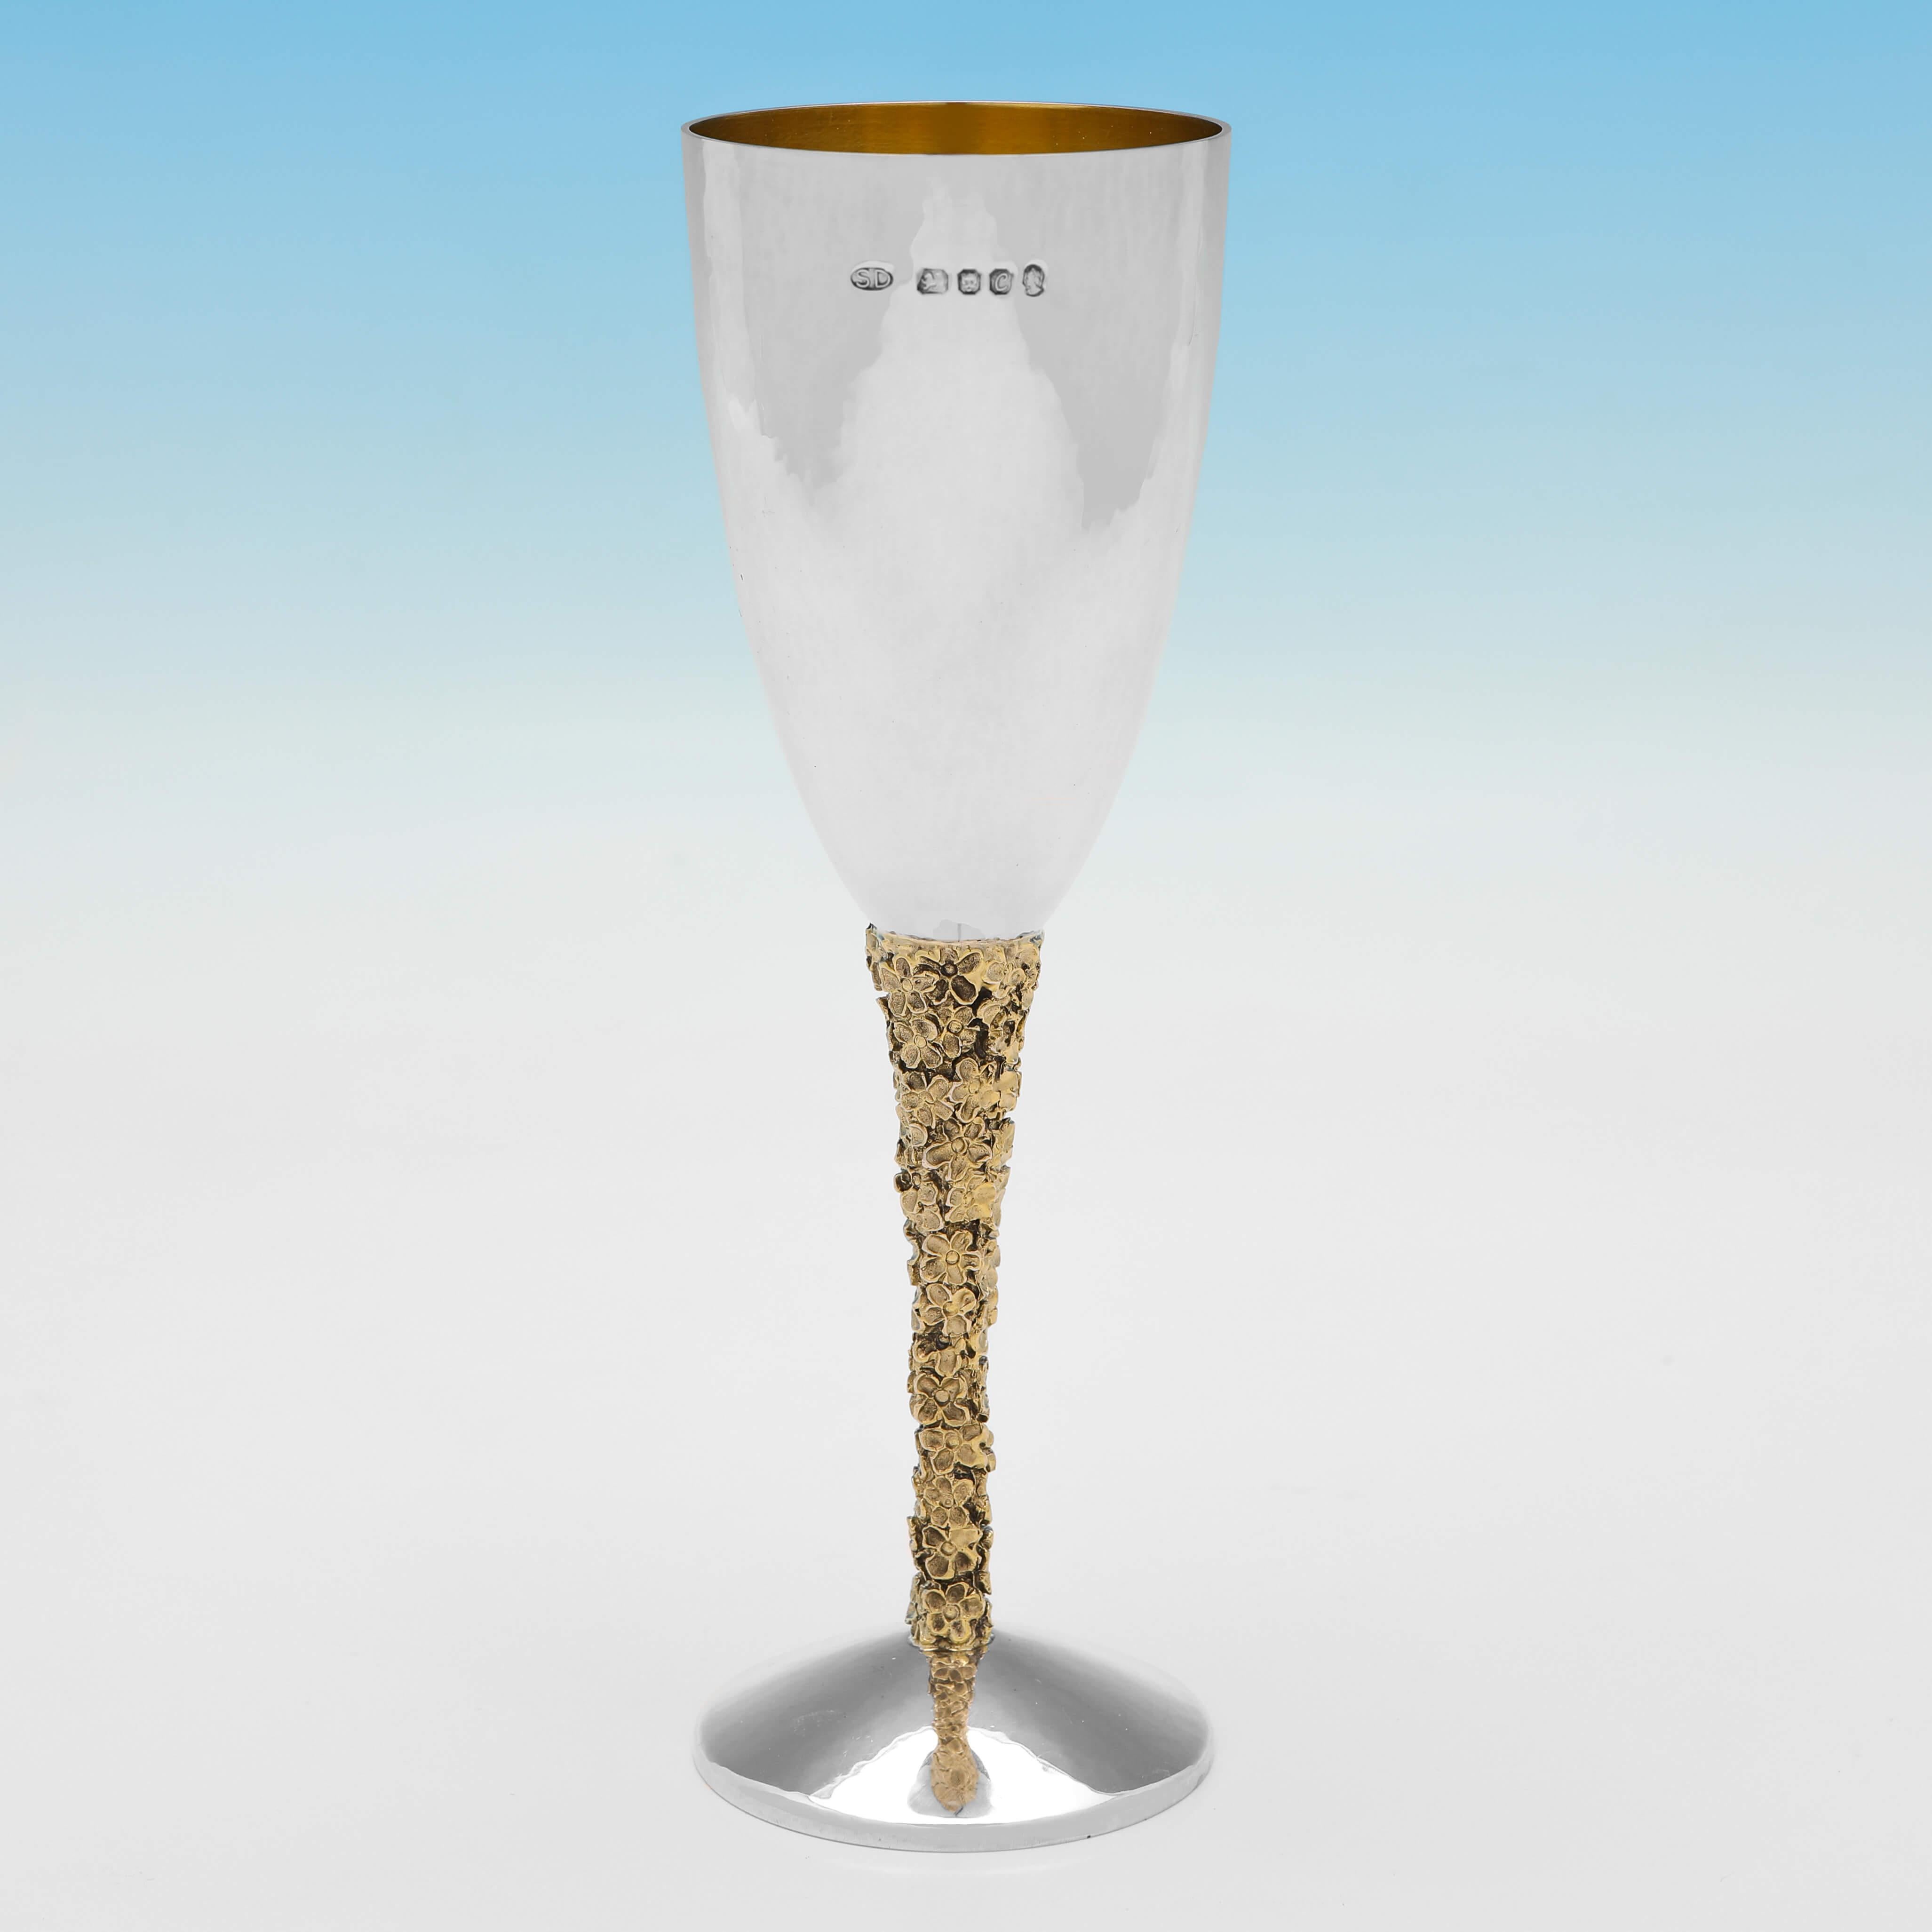 Hallmarked in London in 1977 by Stuart Devlin, this handsome pair of Sterling Silver Champagne Flutes, have cast and gilt floral decoration to the stems, a hand hammered finish, and gilt interiors. 

Each champagne flute measures 7.5